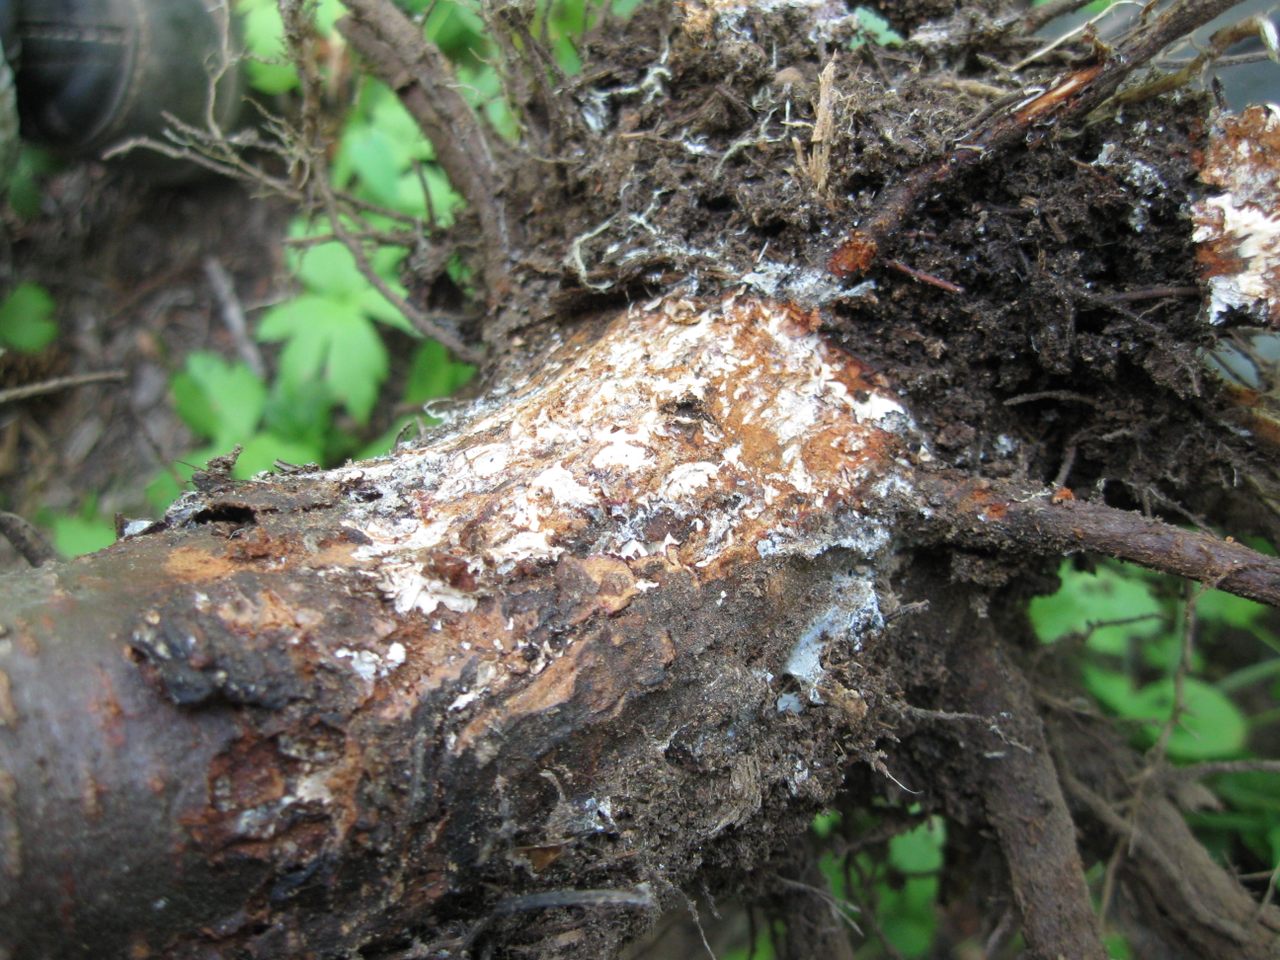 The world's largest living thing is a stealthy parasite that lives mostly underground and beneath the bark of infected trees in a pale, stringy fungal network.